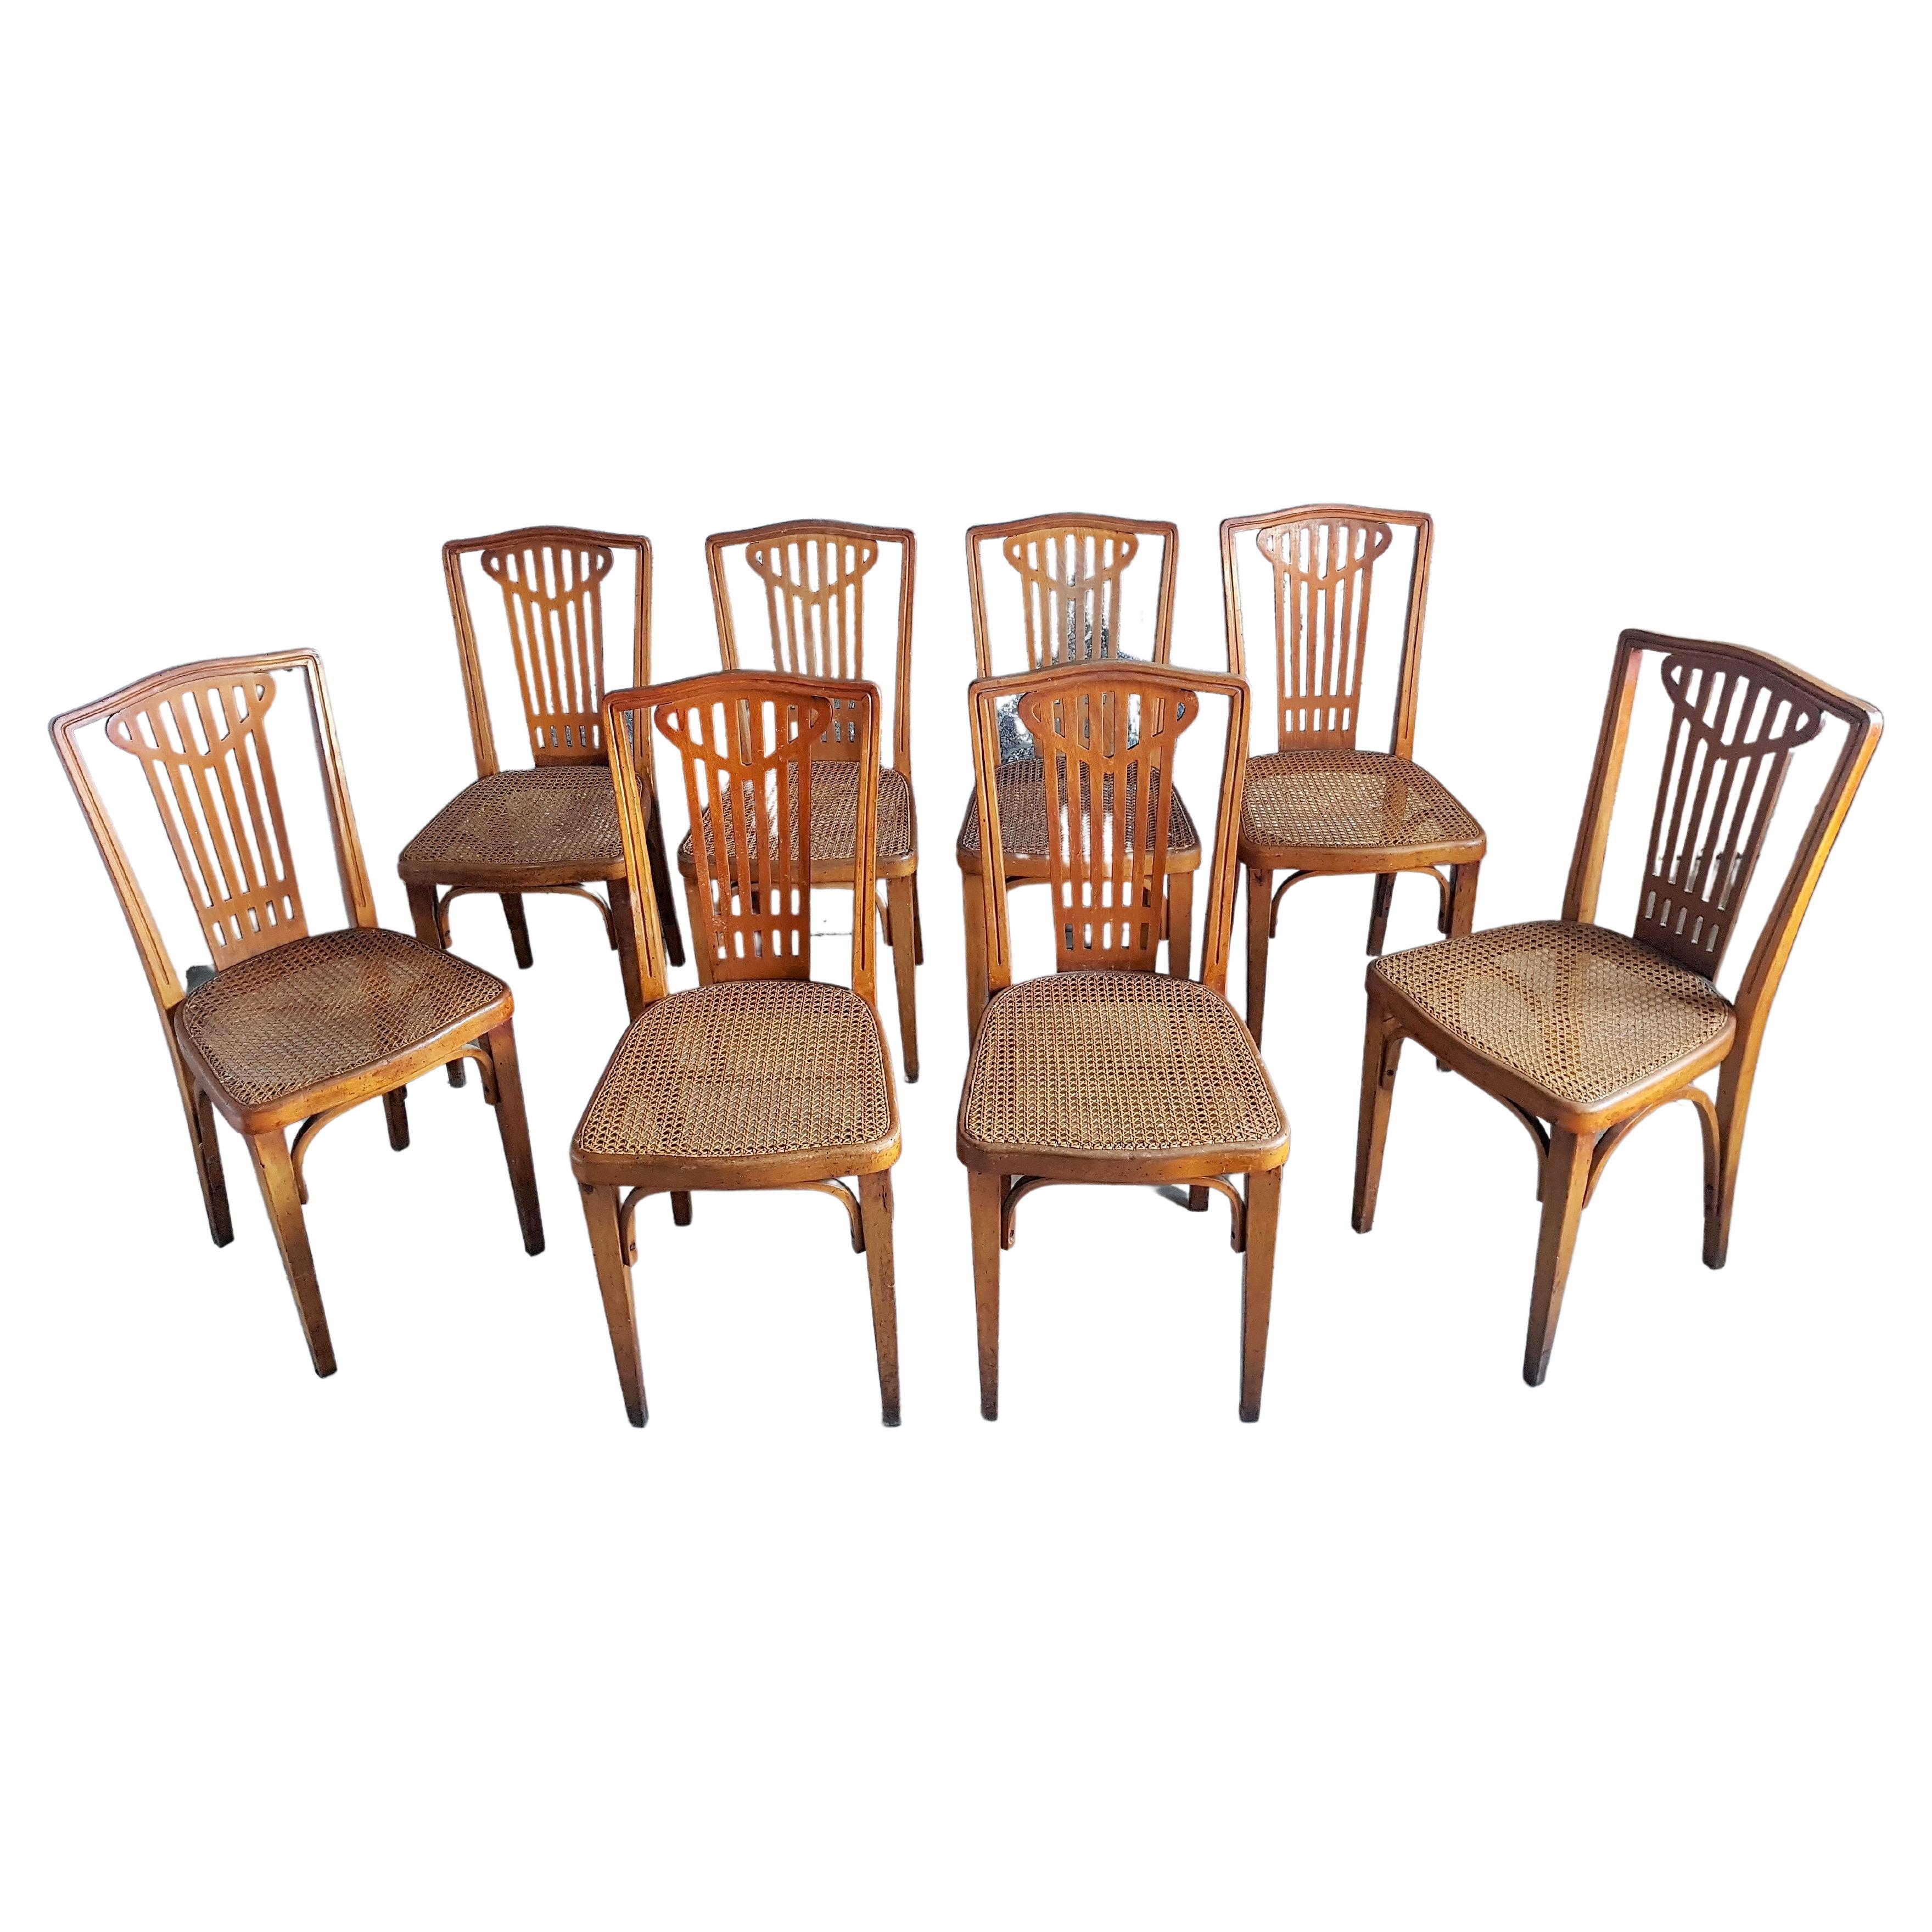 Arts and Craft Art Nouveau Set of 8 Bentwood Chairs Signed Thonet, 1900 For Sale